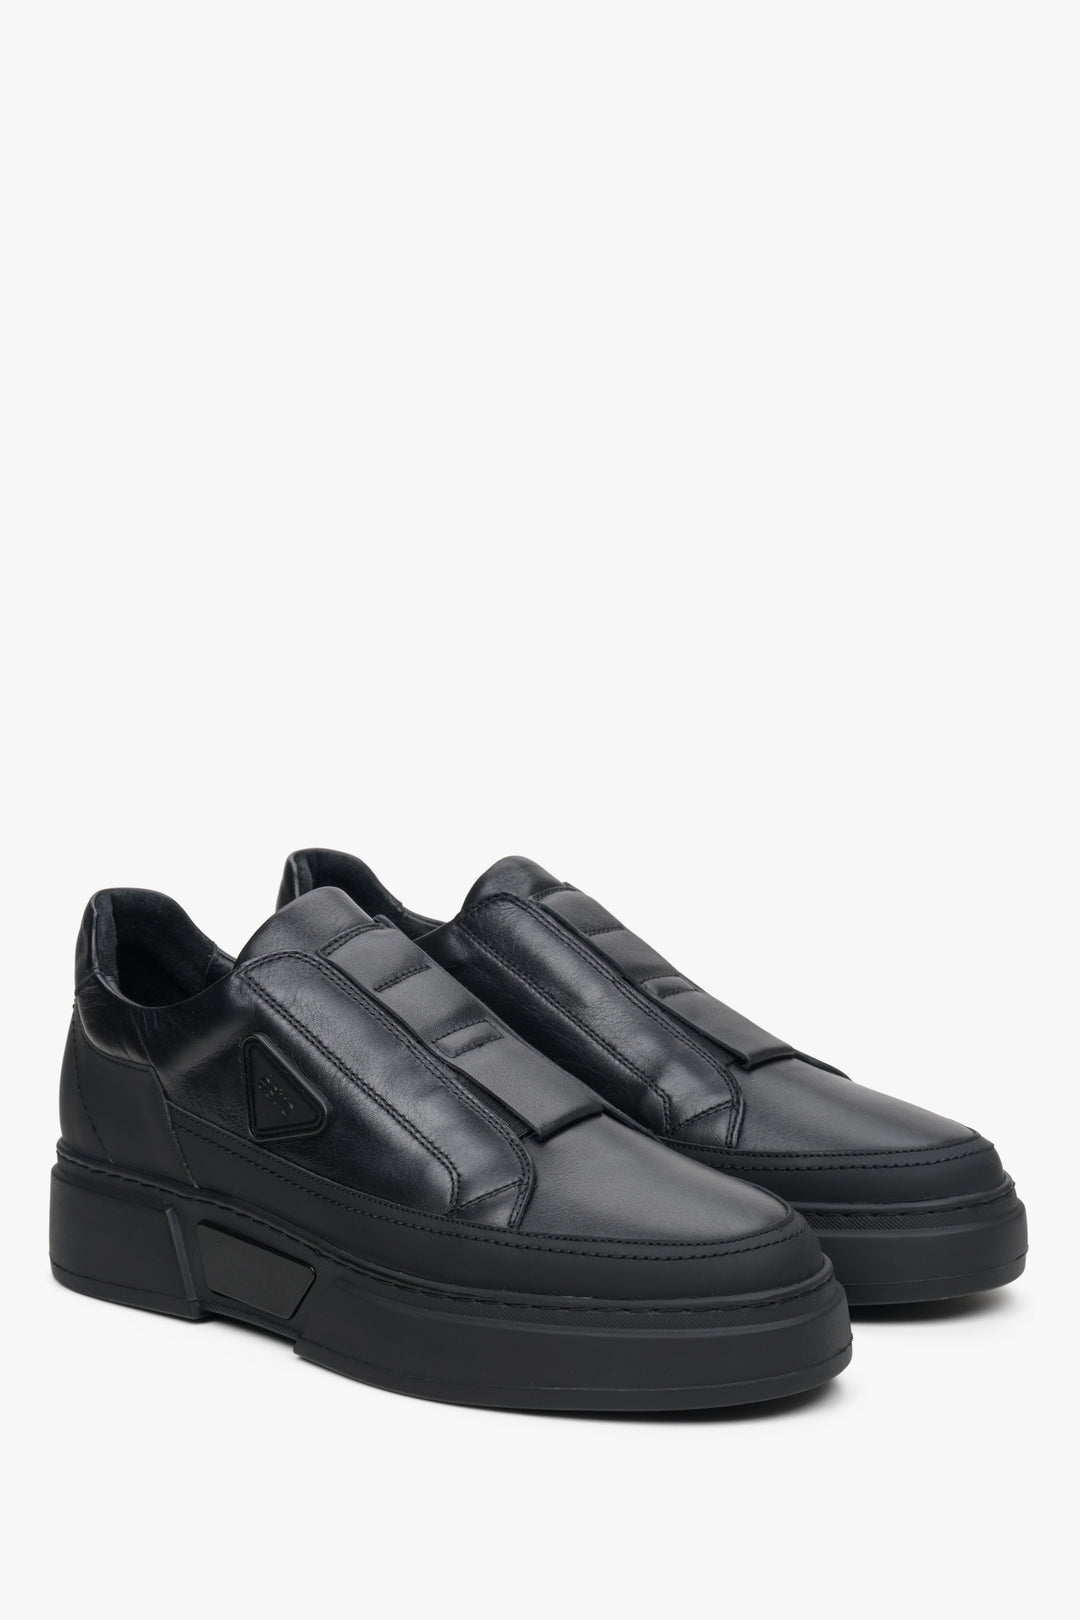 Men's soft black slip-on sneakers made of genuine leather by Estro.